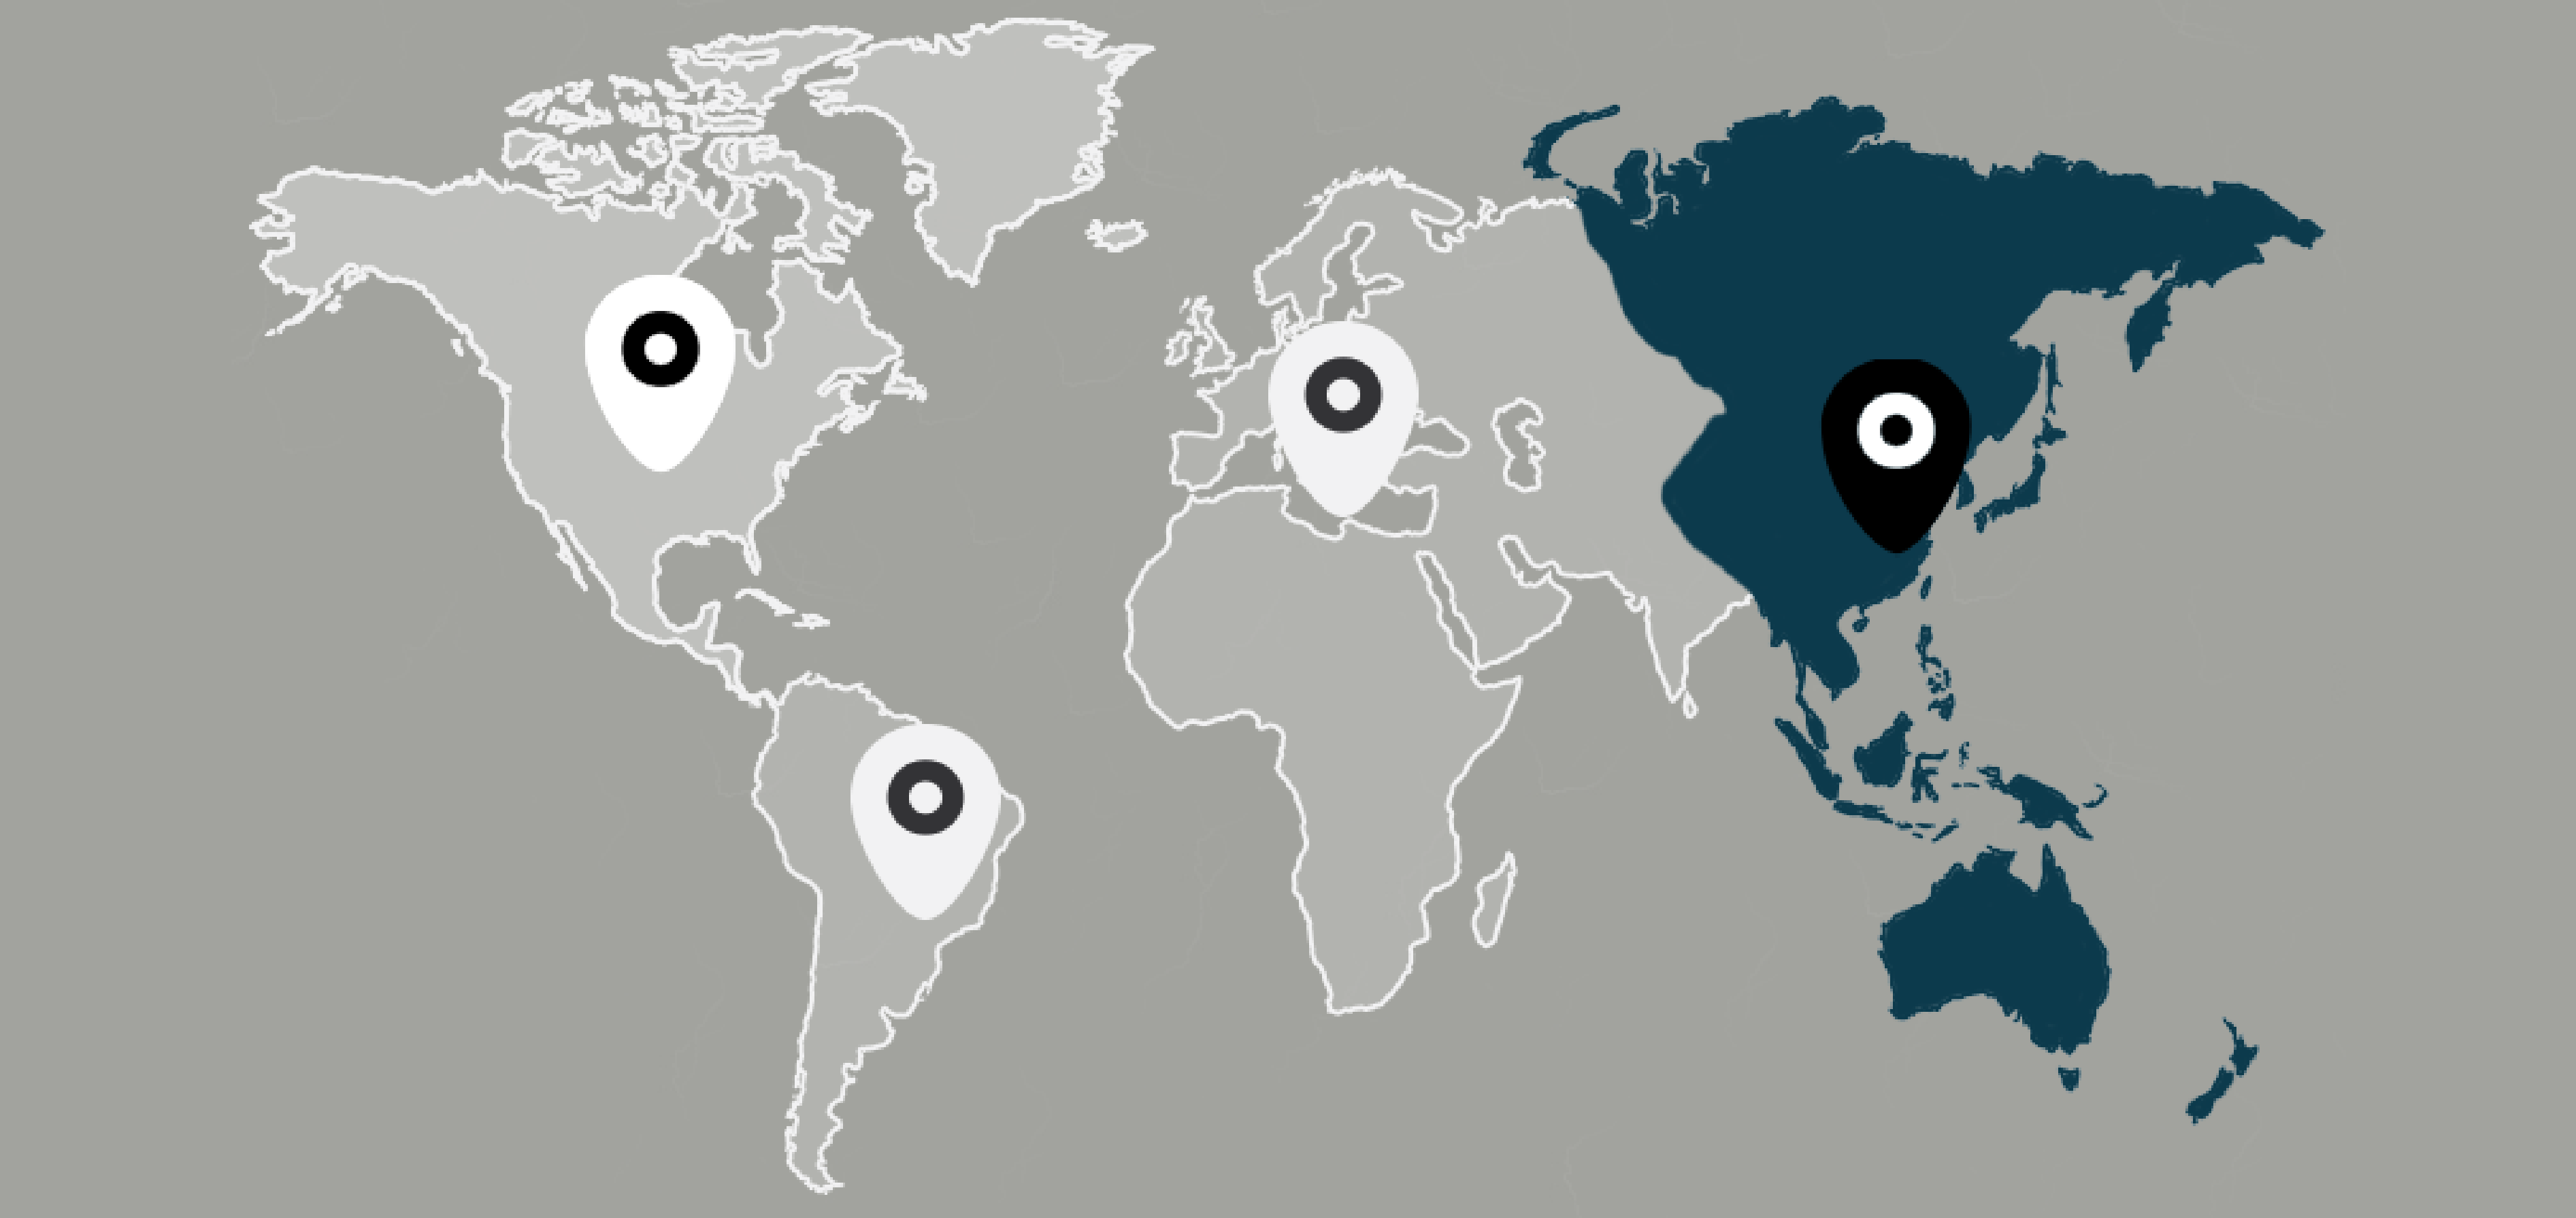 Olin Locations Asia | Pacific